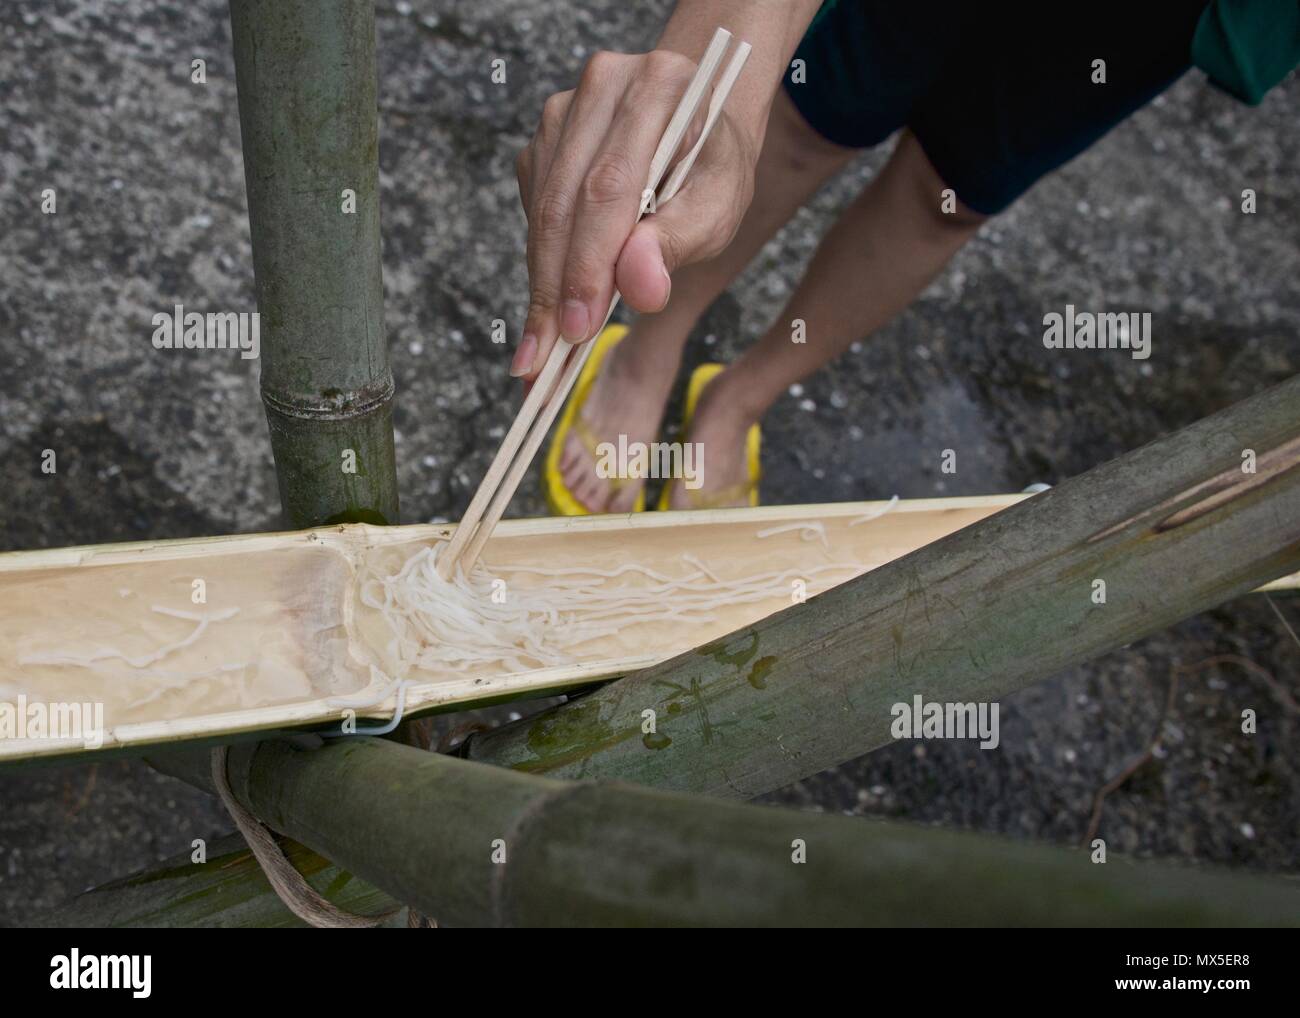 Catching a flowing noodle while eating traditional nagashi suomen (flowing noodles) in Kyushu, Japan Stock Photo